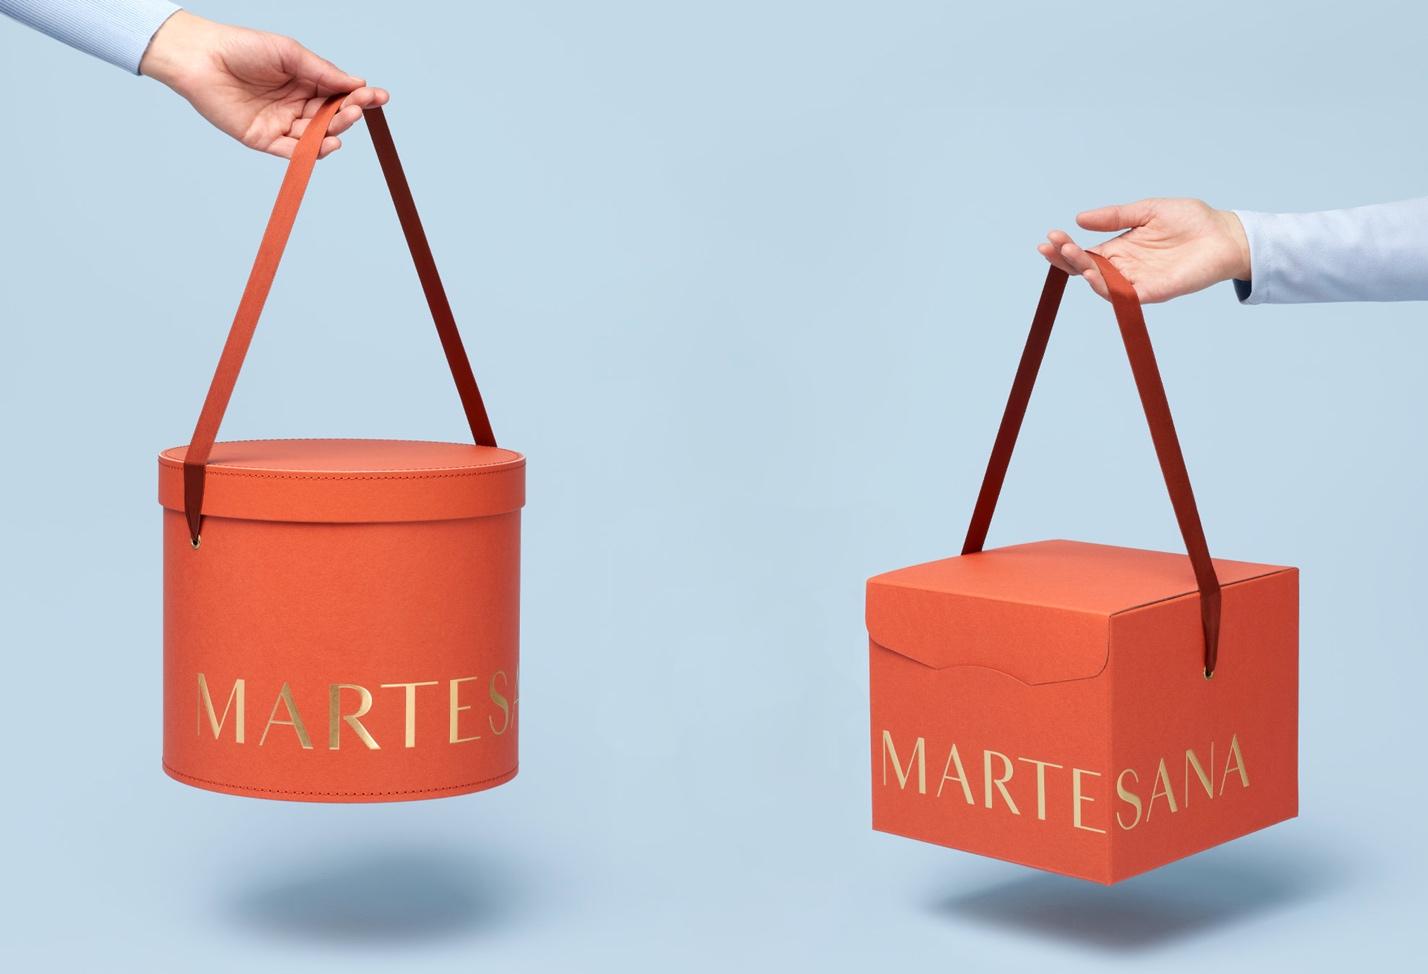 Branding and packaging design artifacts for Martesana pastry shop rebranding project